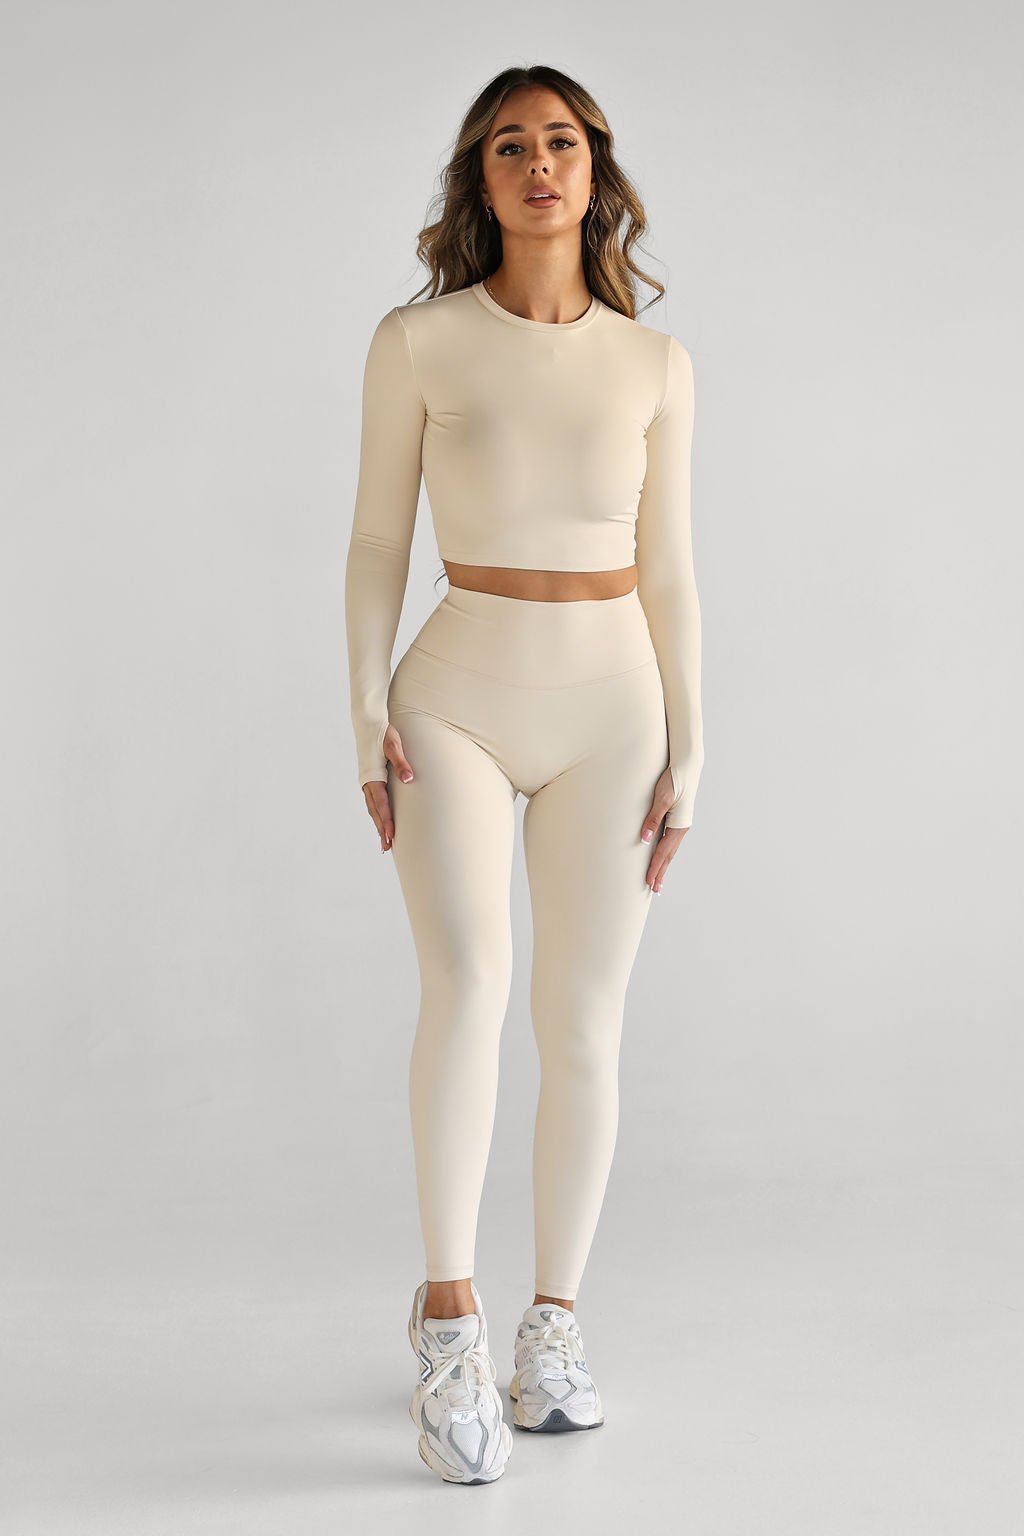 SCULPT Long Sleeve Crop - French Vanilla (AVAILABLE 13/08) - LEELO ACTIVE